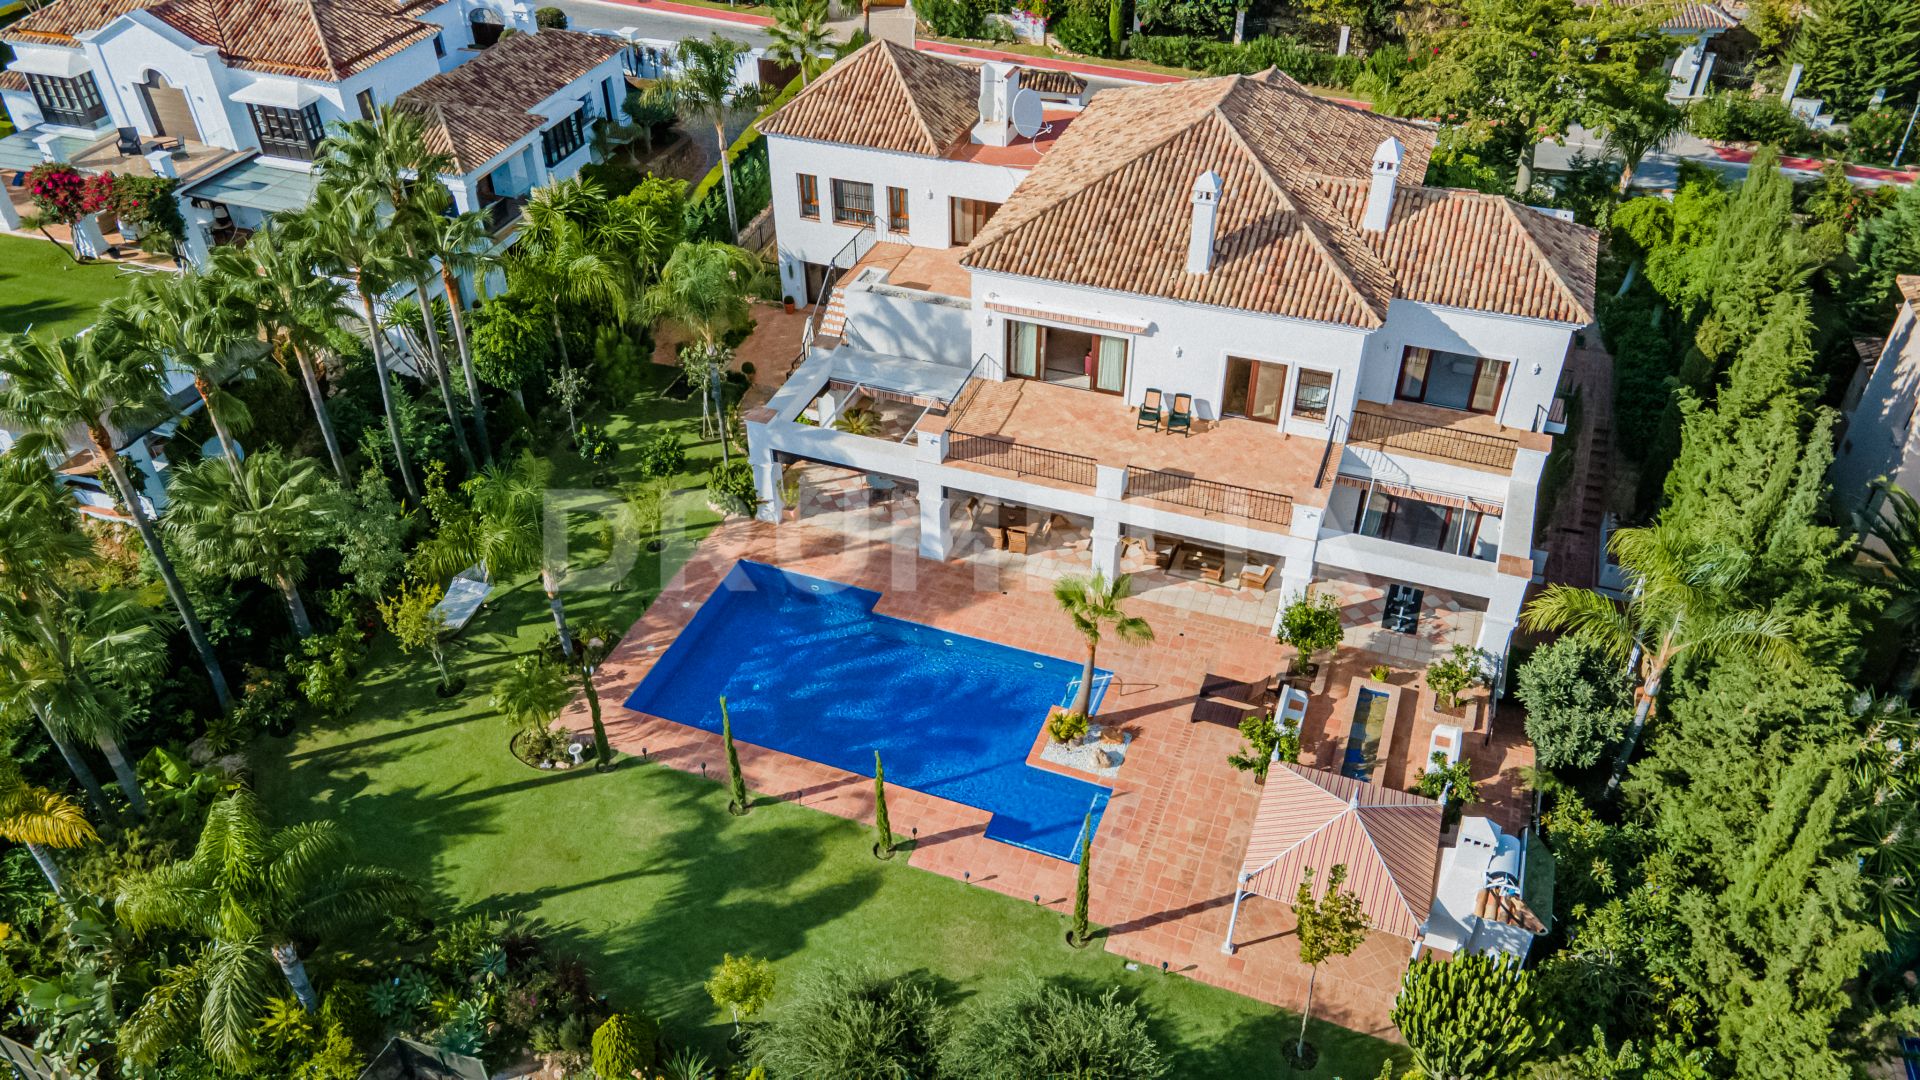 Beautiful High- End Mediterranean House with Southern Charm in Sierra Blanca, Marbella's Golden Mile